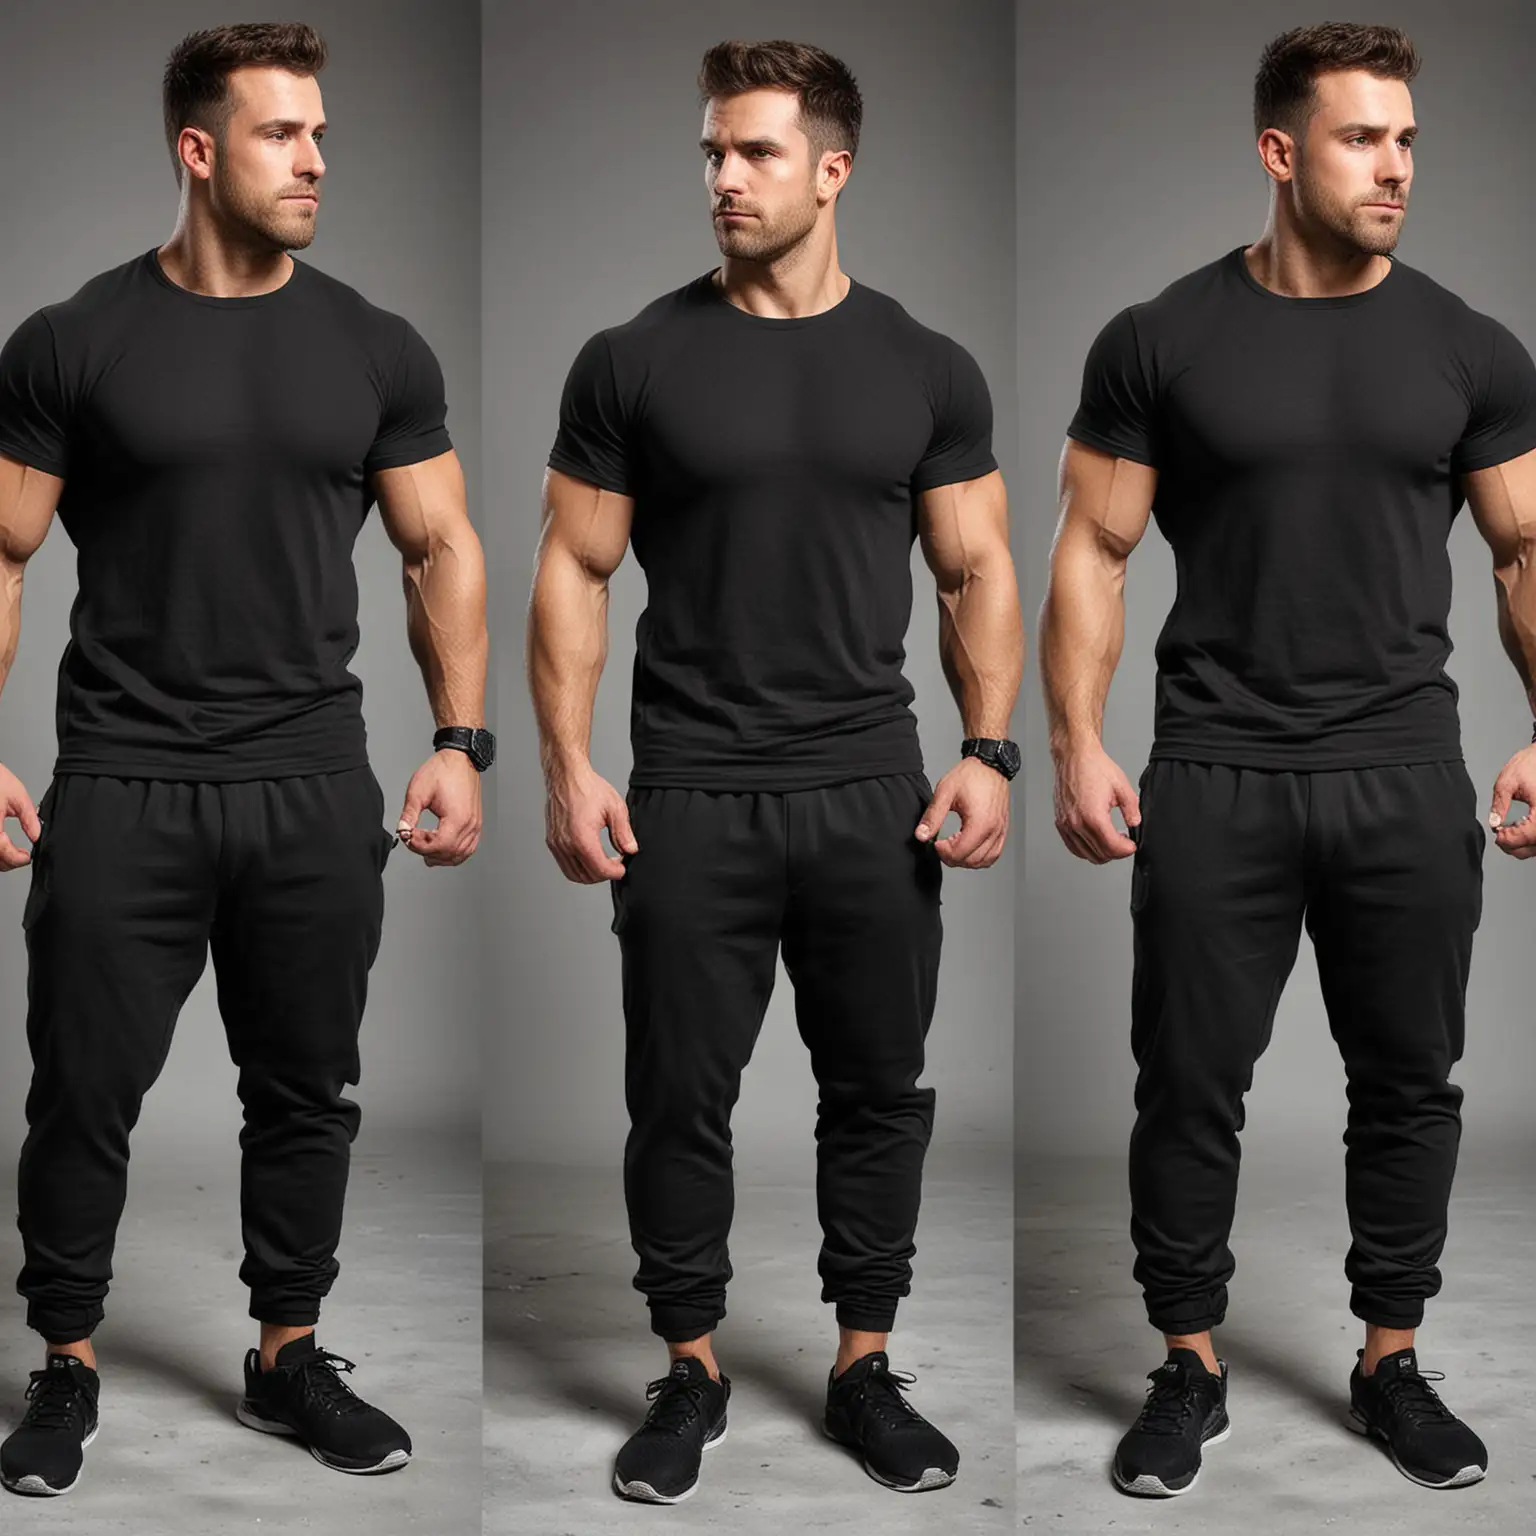 generate an image of a crossfit man wearing balck tshirt with black track pants from 4 angles